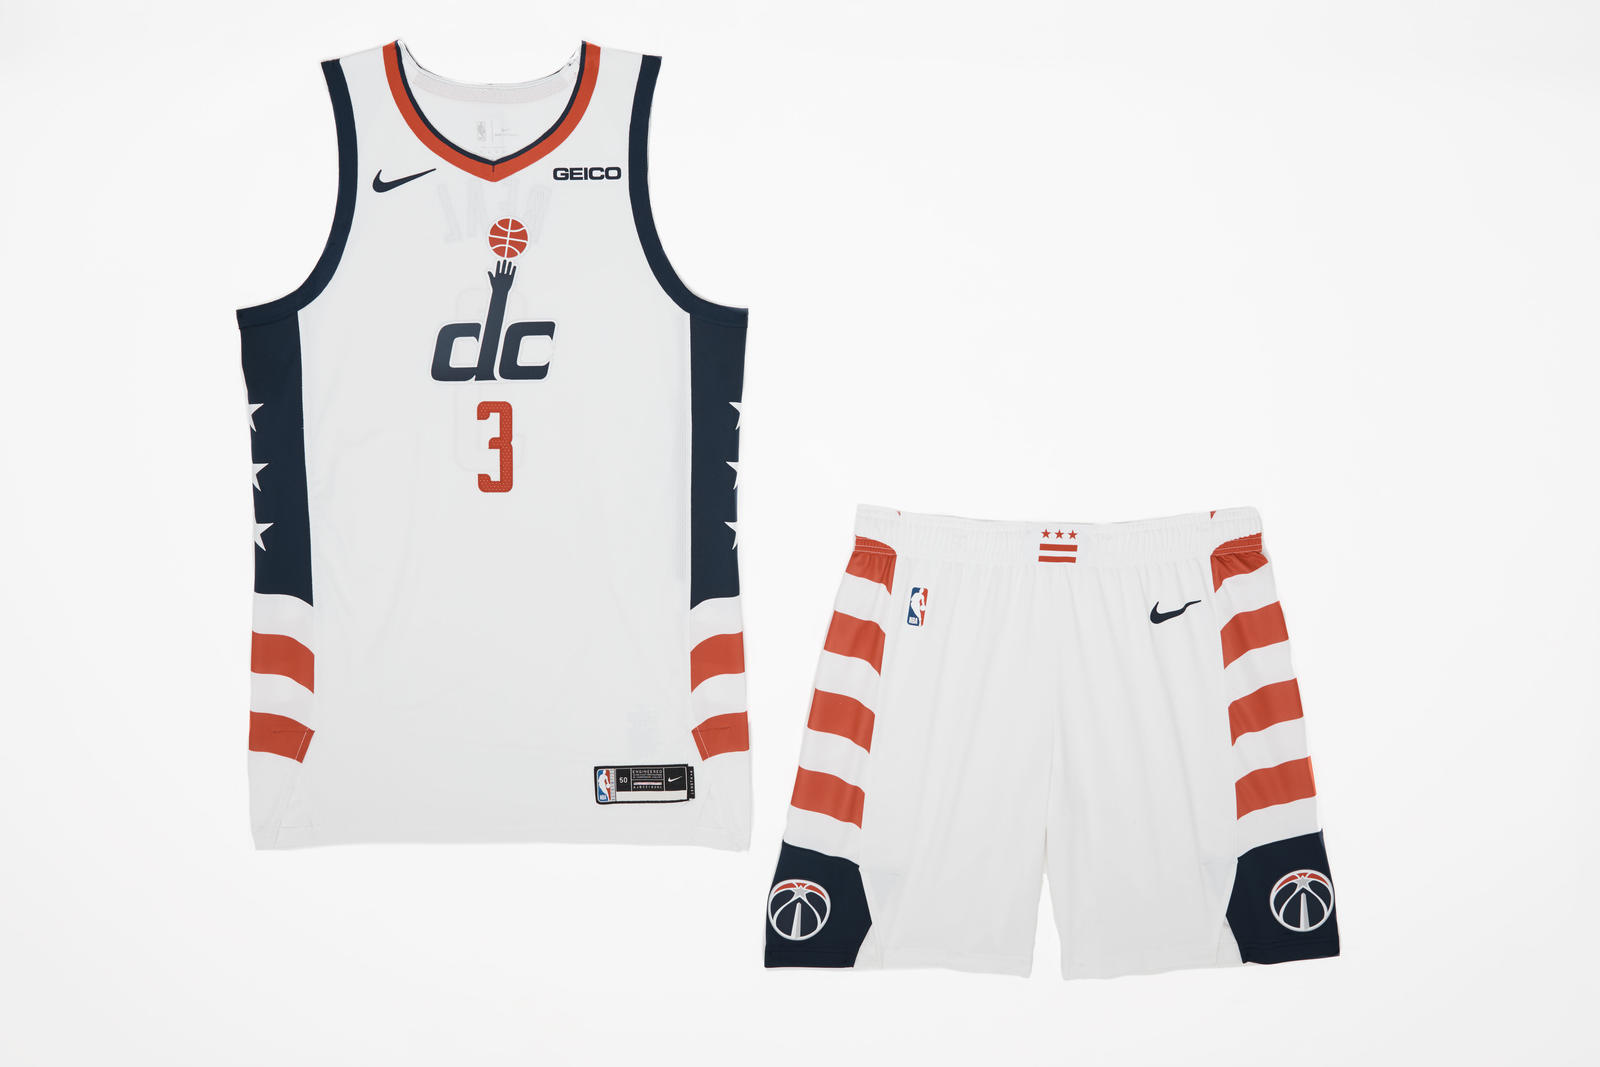 OQIUM - The NBA City Edition 20 jerseys are inspired by the city's